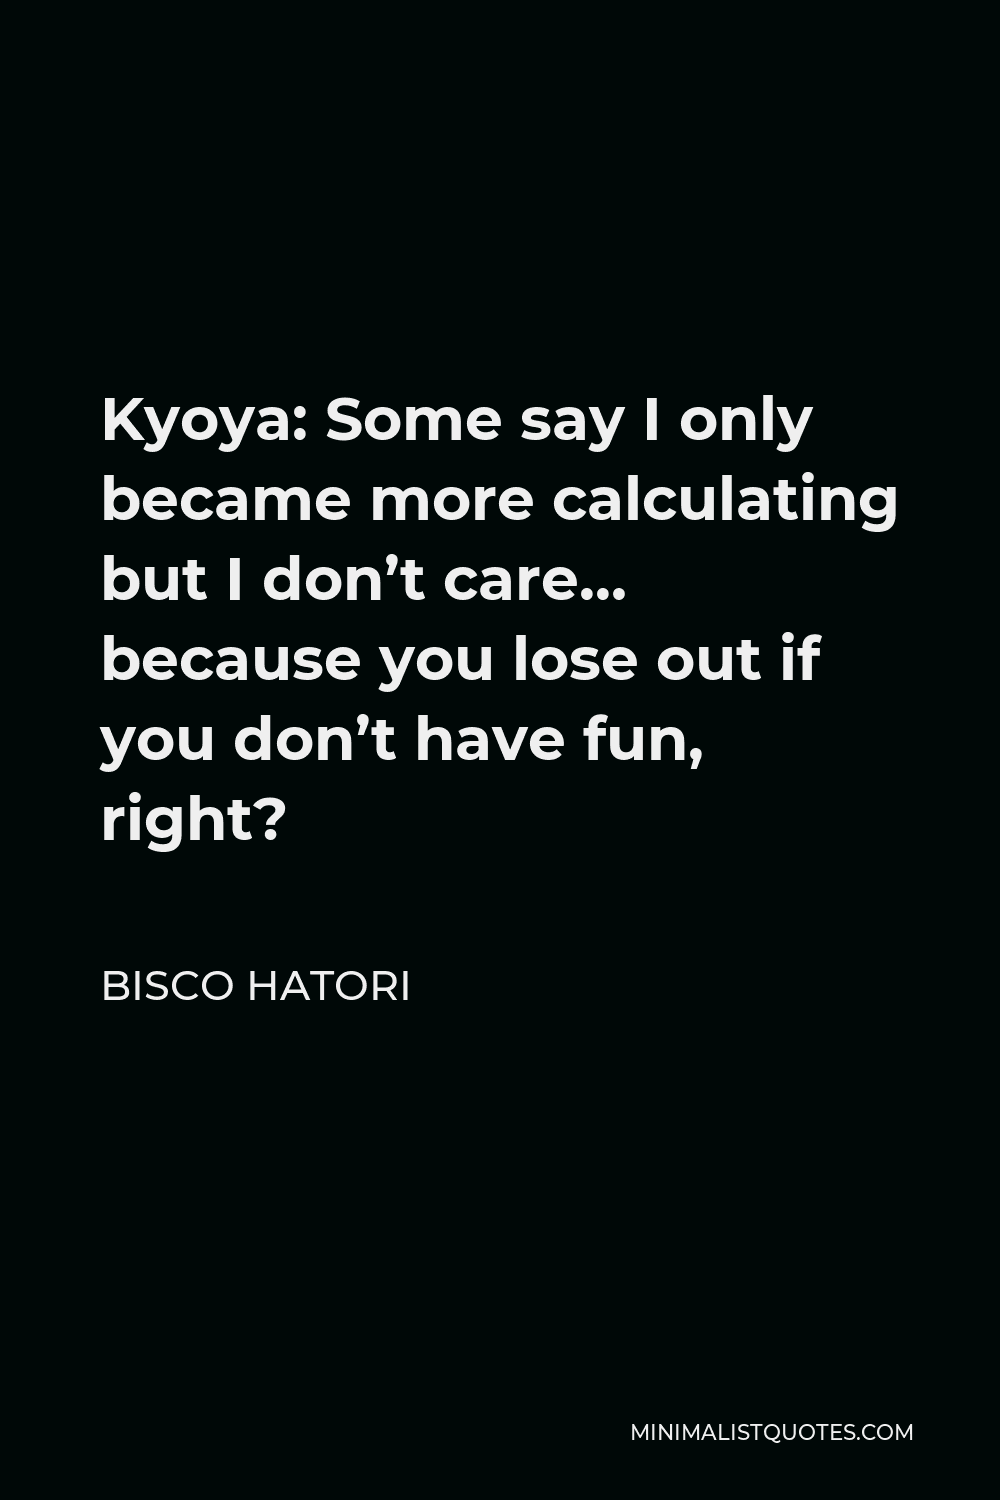 Bisco Hatori Quote - Kyoya: Some say I only became more calculating but I don’t care… because you lose out if you don’t have fun, right?